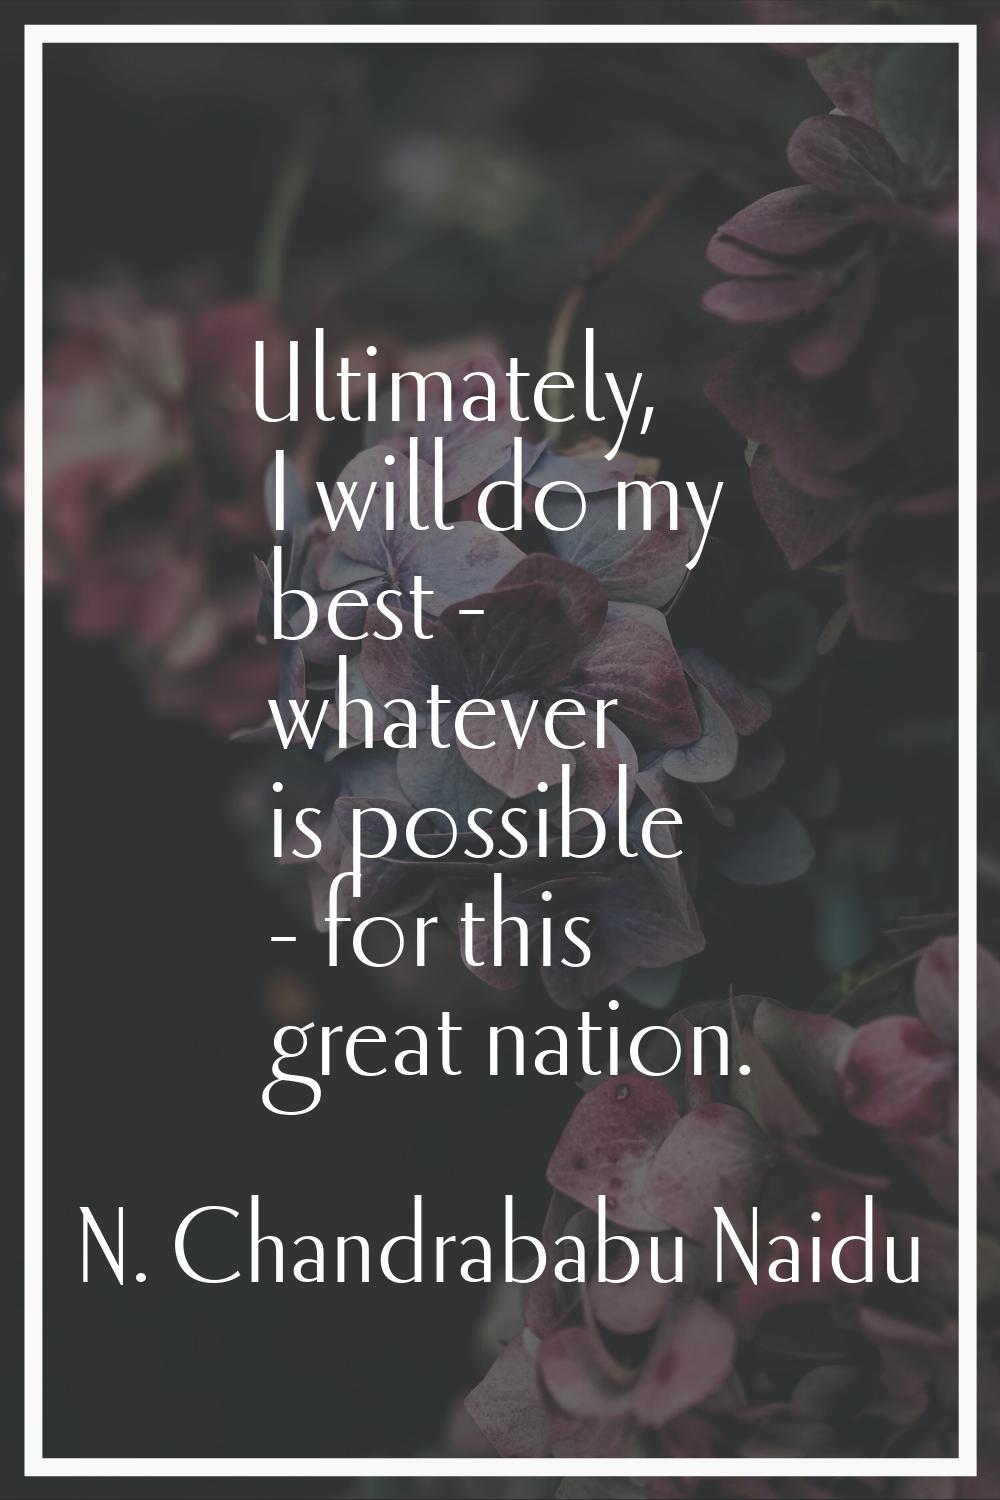 Ultimately, I will do my best - whatever is possible - for this great nation.